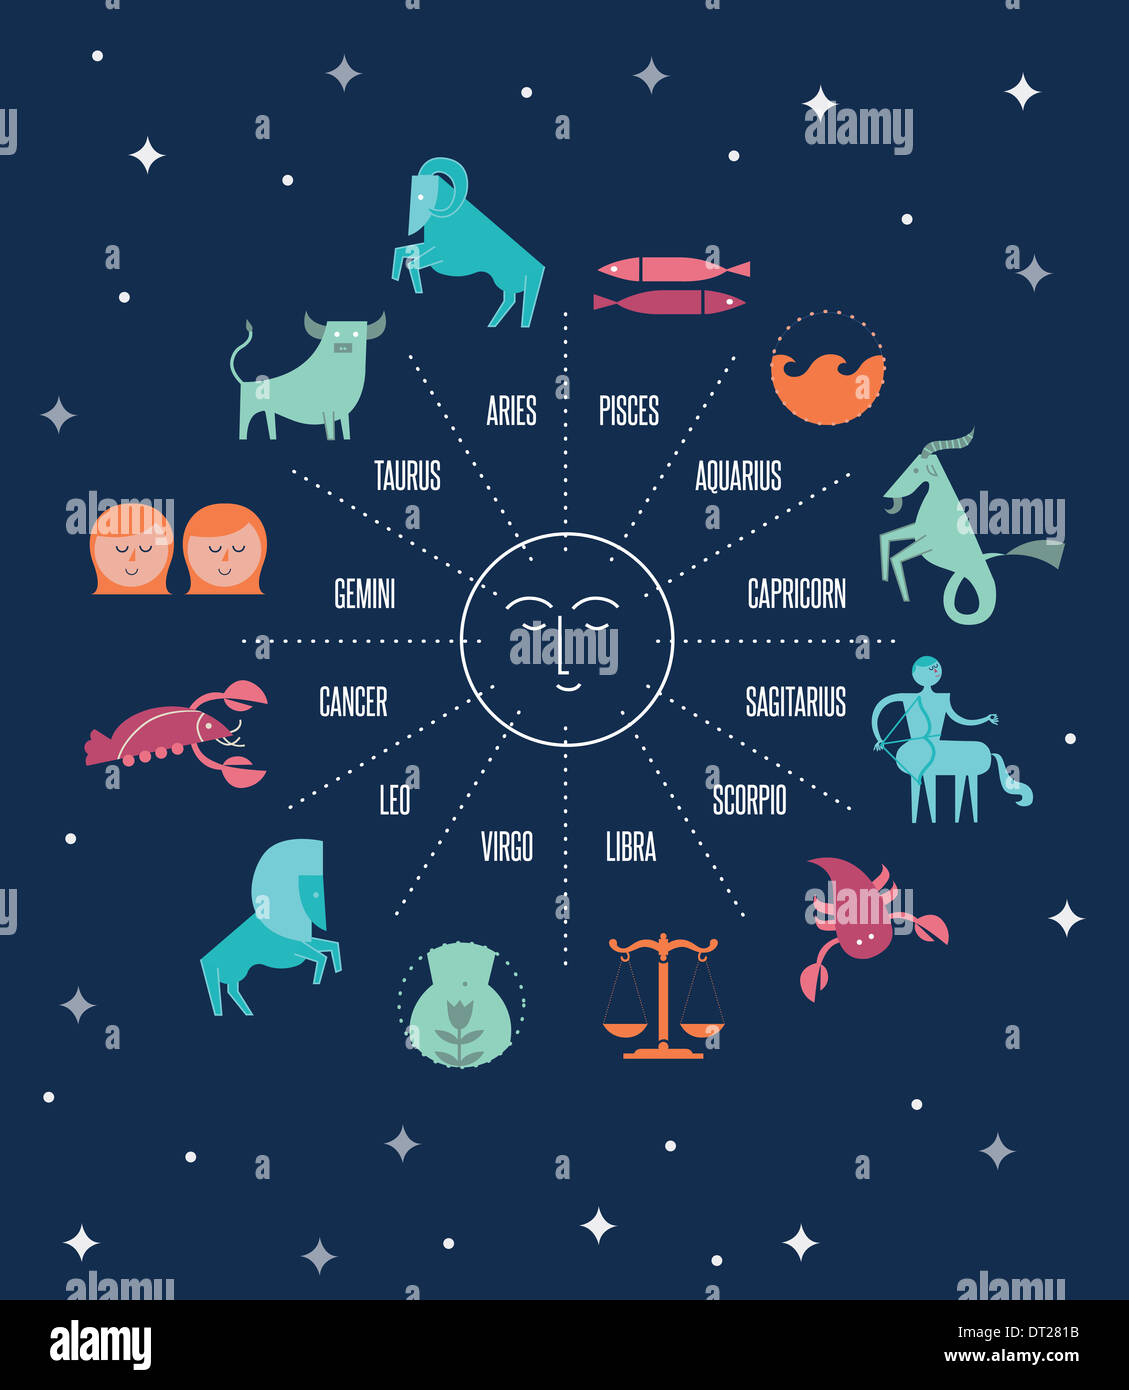 Illustration of zodiac signs over blue background Stock Photo